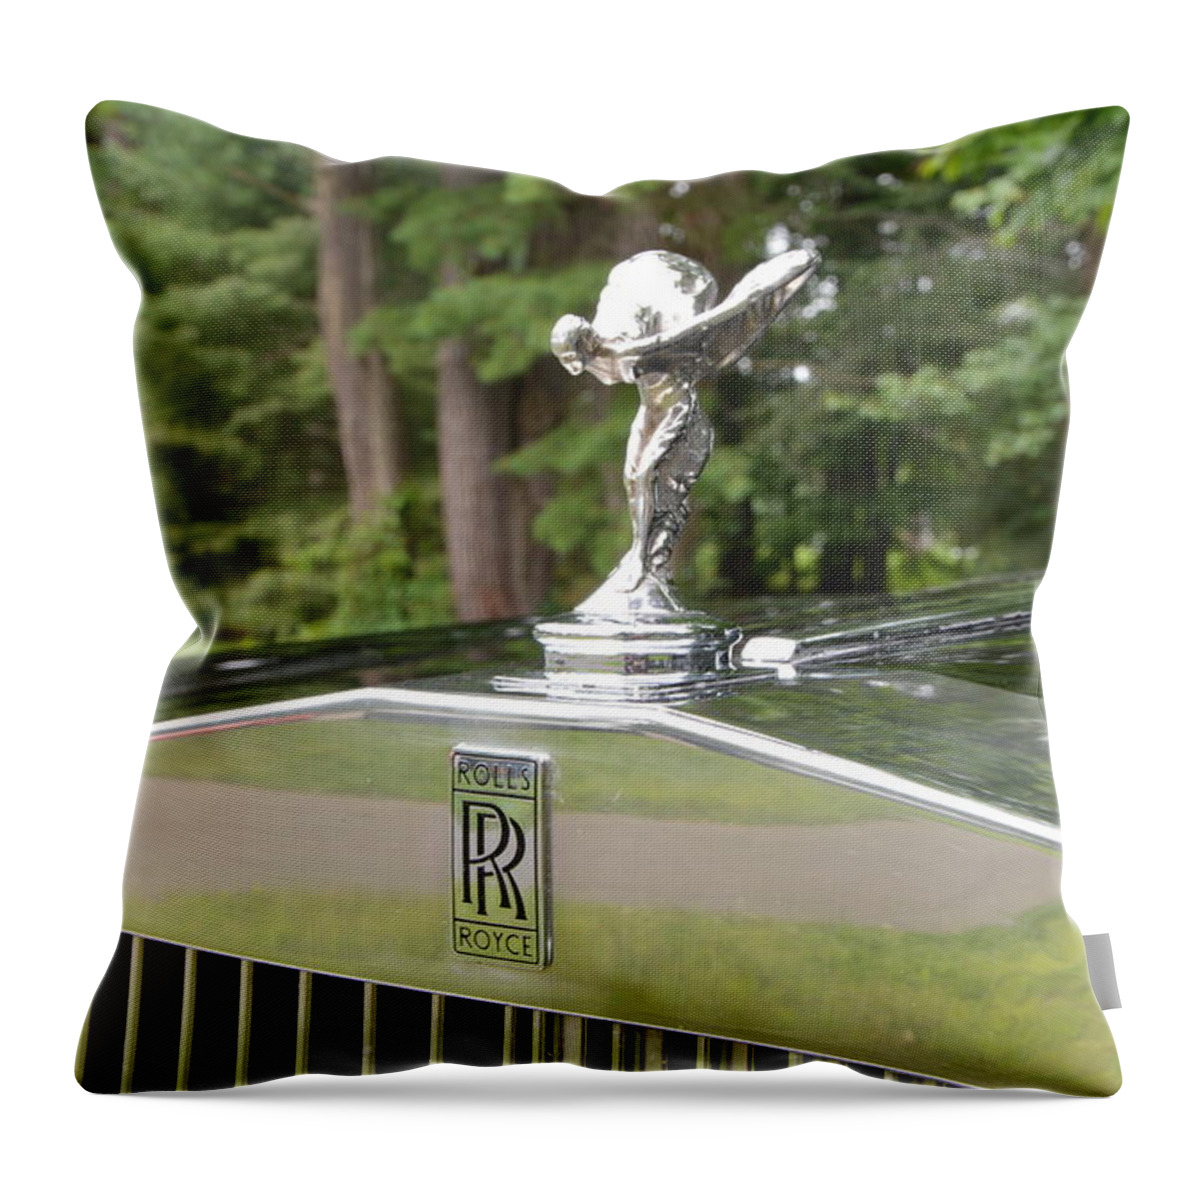 Automobiles Throw Pillow featuring the photograph Ecstasy by John Schneider